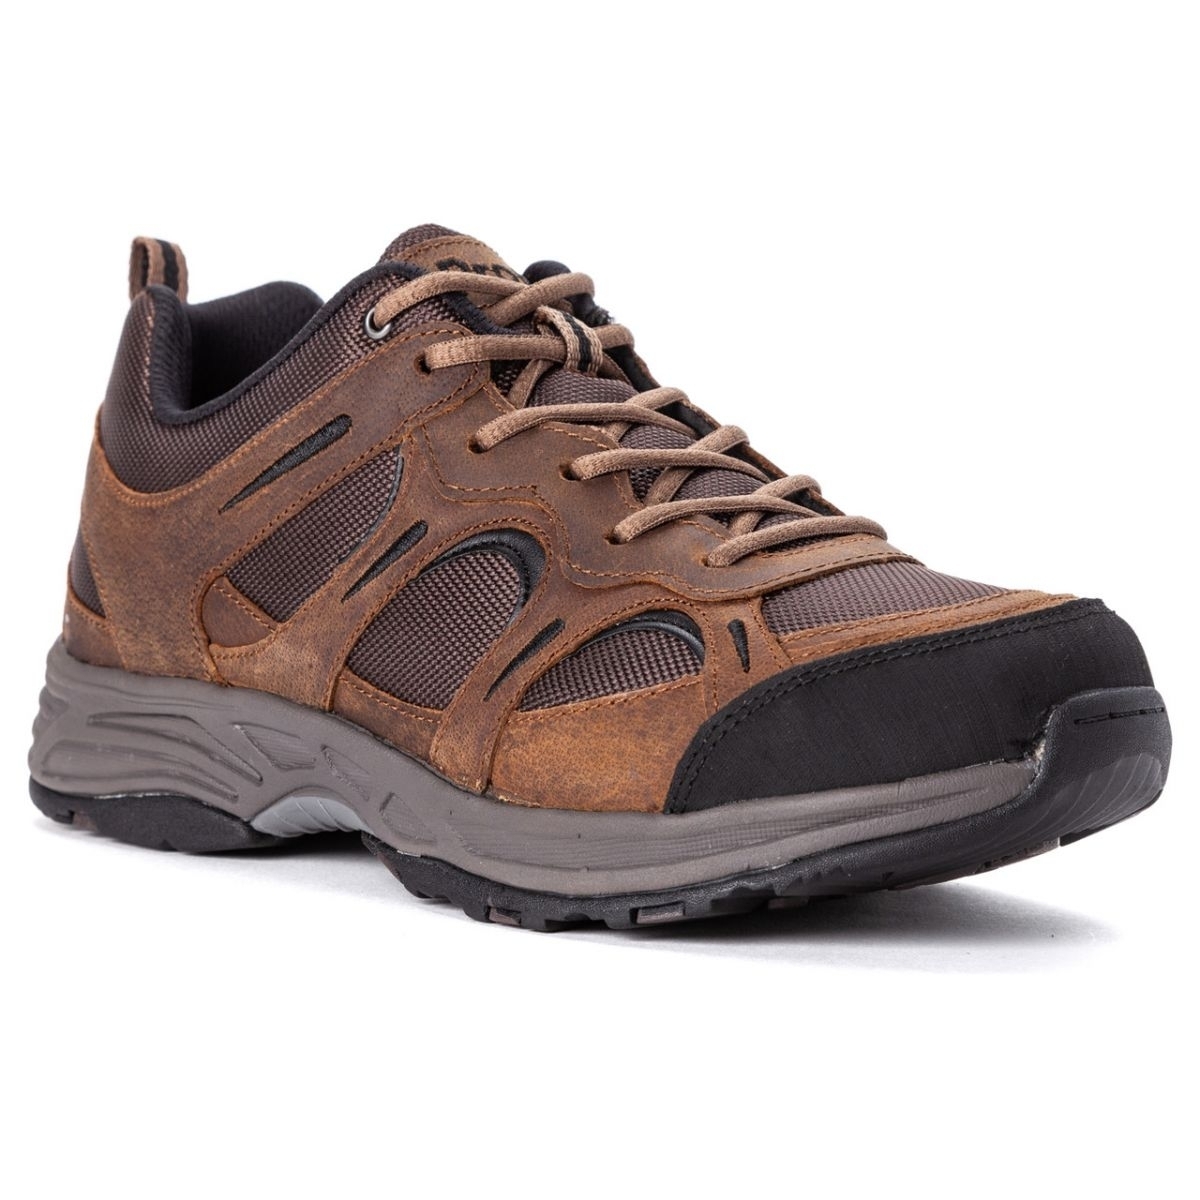 Propet Men's Connelly Hiking Shoe Brown - M5503BR BROWN - BROWN, 12-D